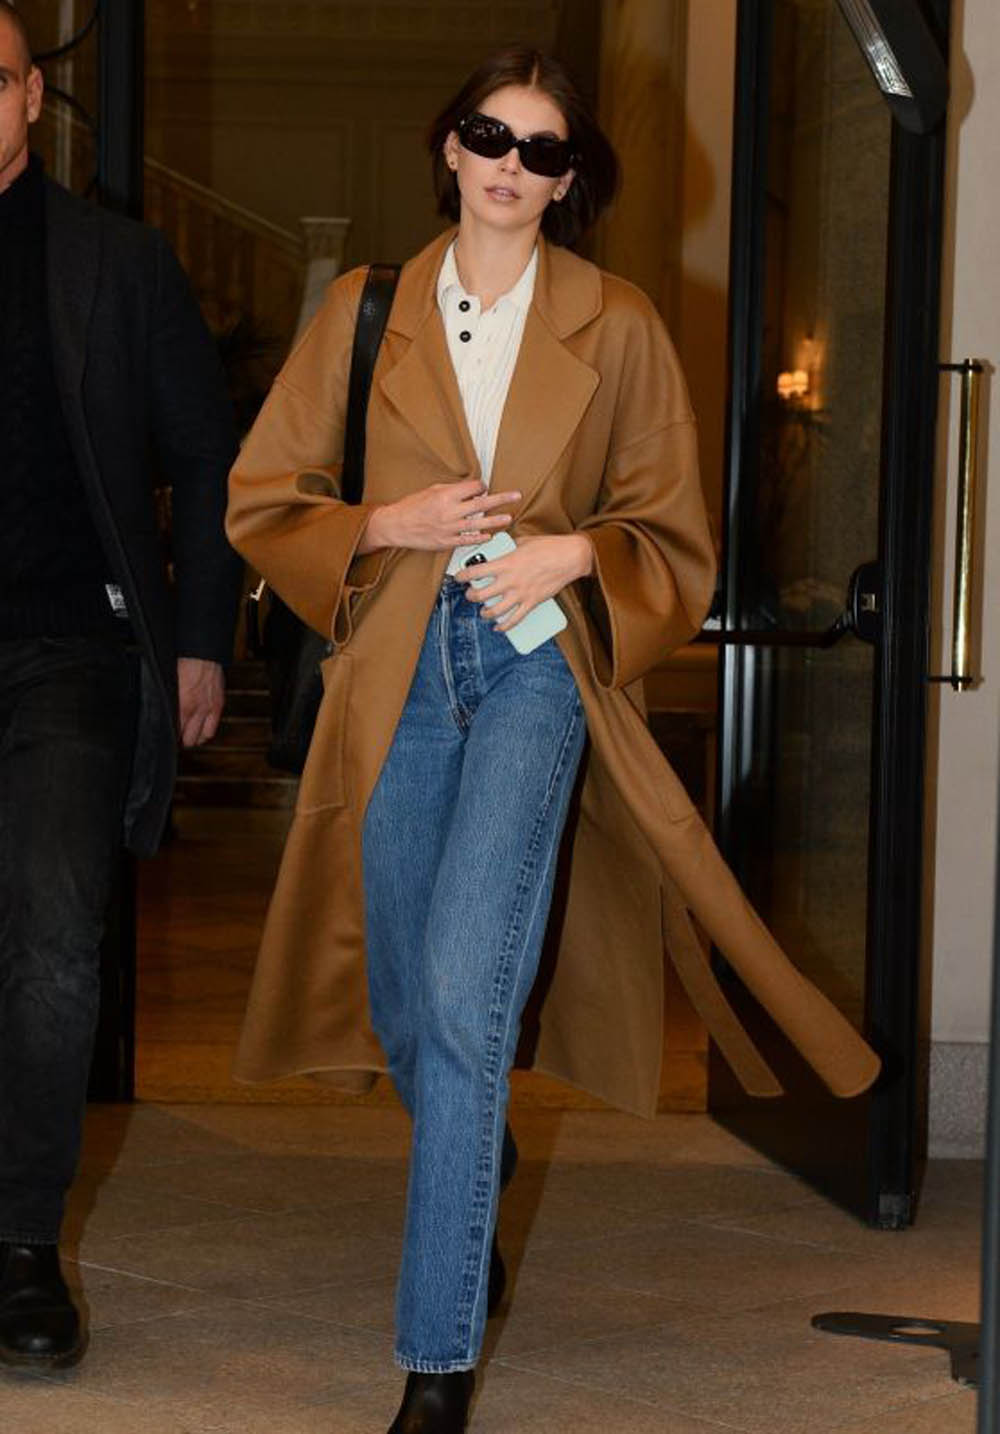 Kaia Gerber in Milan airport | About Her